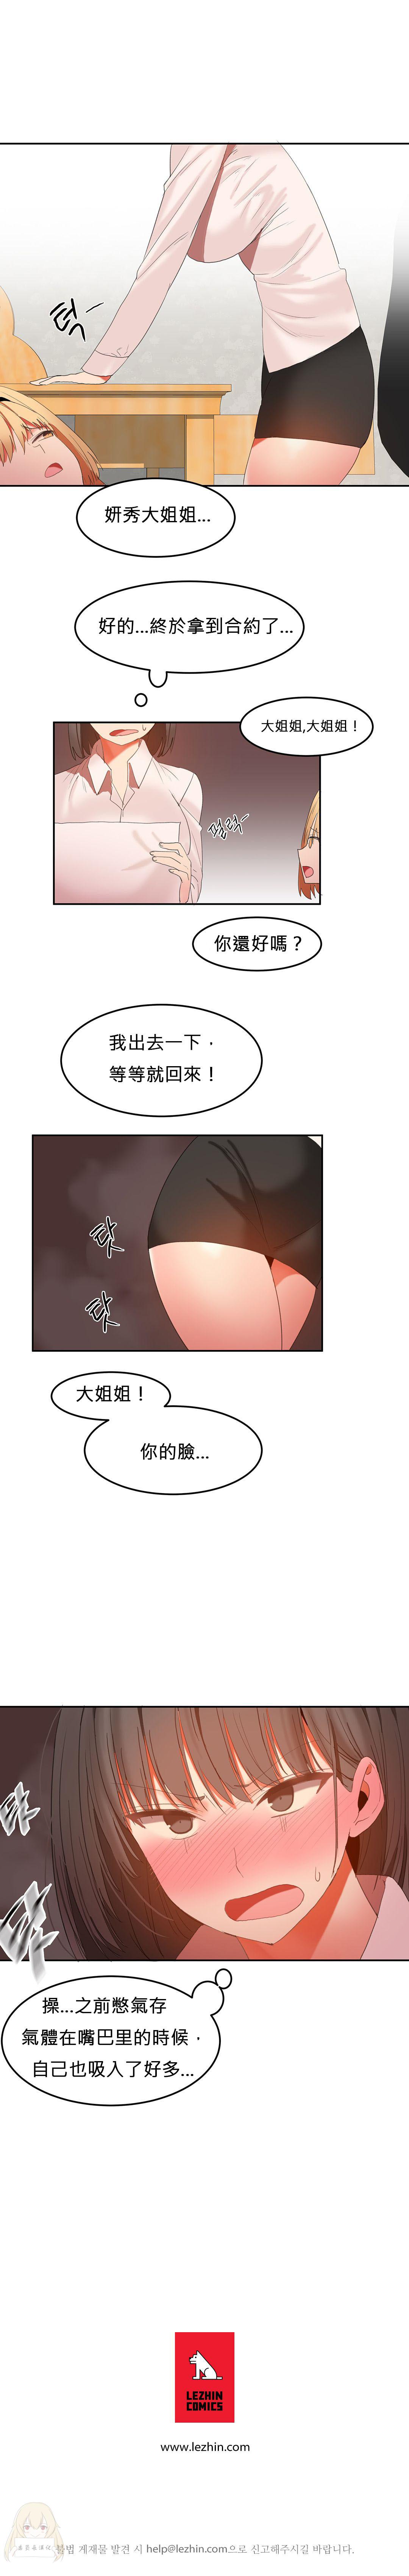 Shecock Hahri's Lumpy Boardhouse Ch. 0~28【委員長個人漢化】（持續更新） Letsdoeit - Page 491